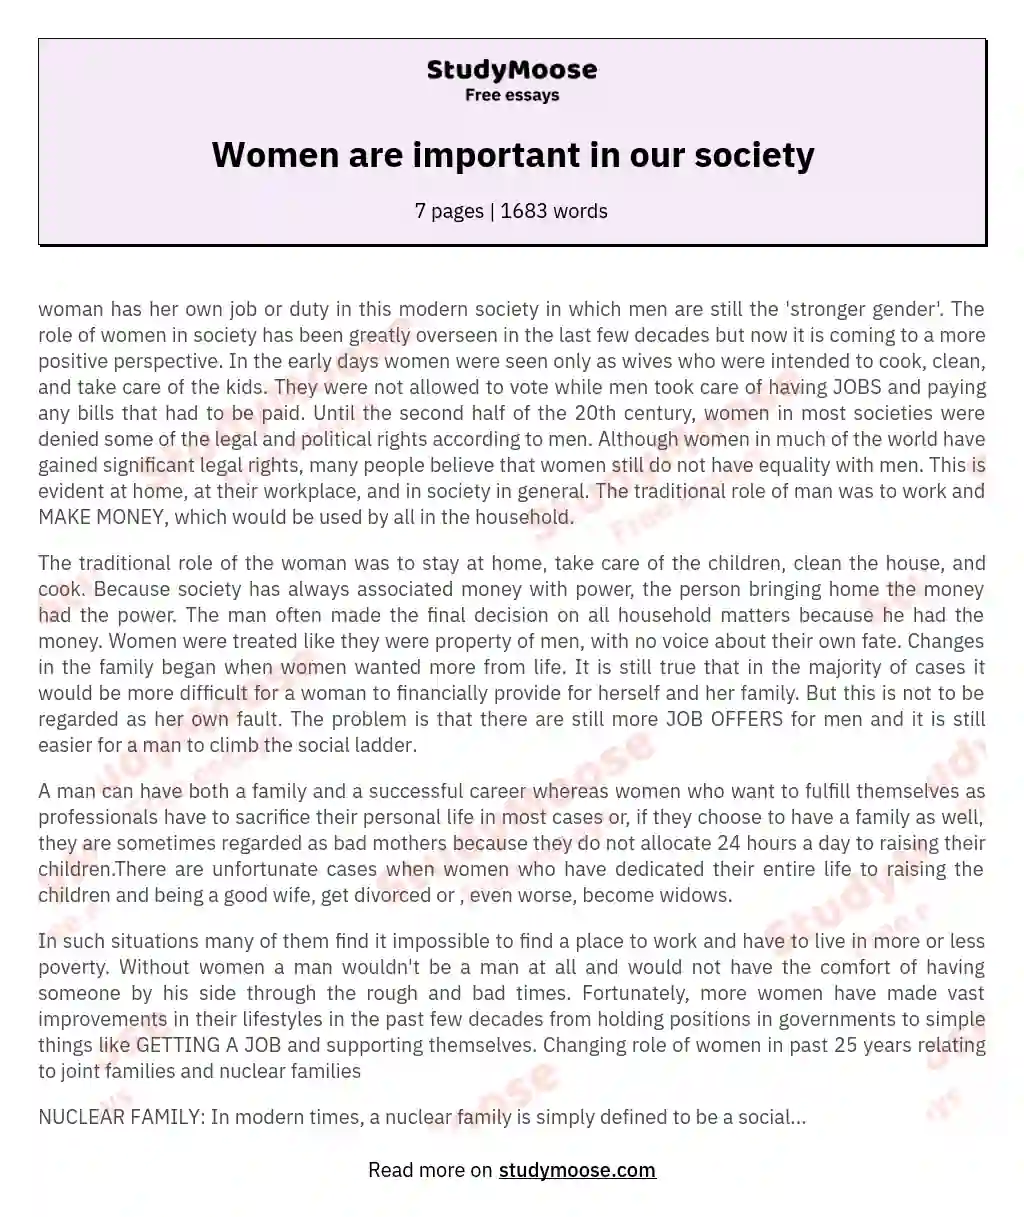 Women are important in our society essay